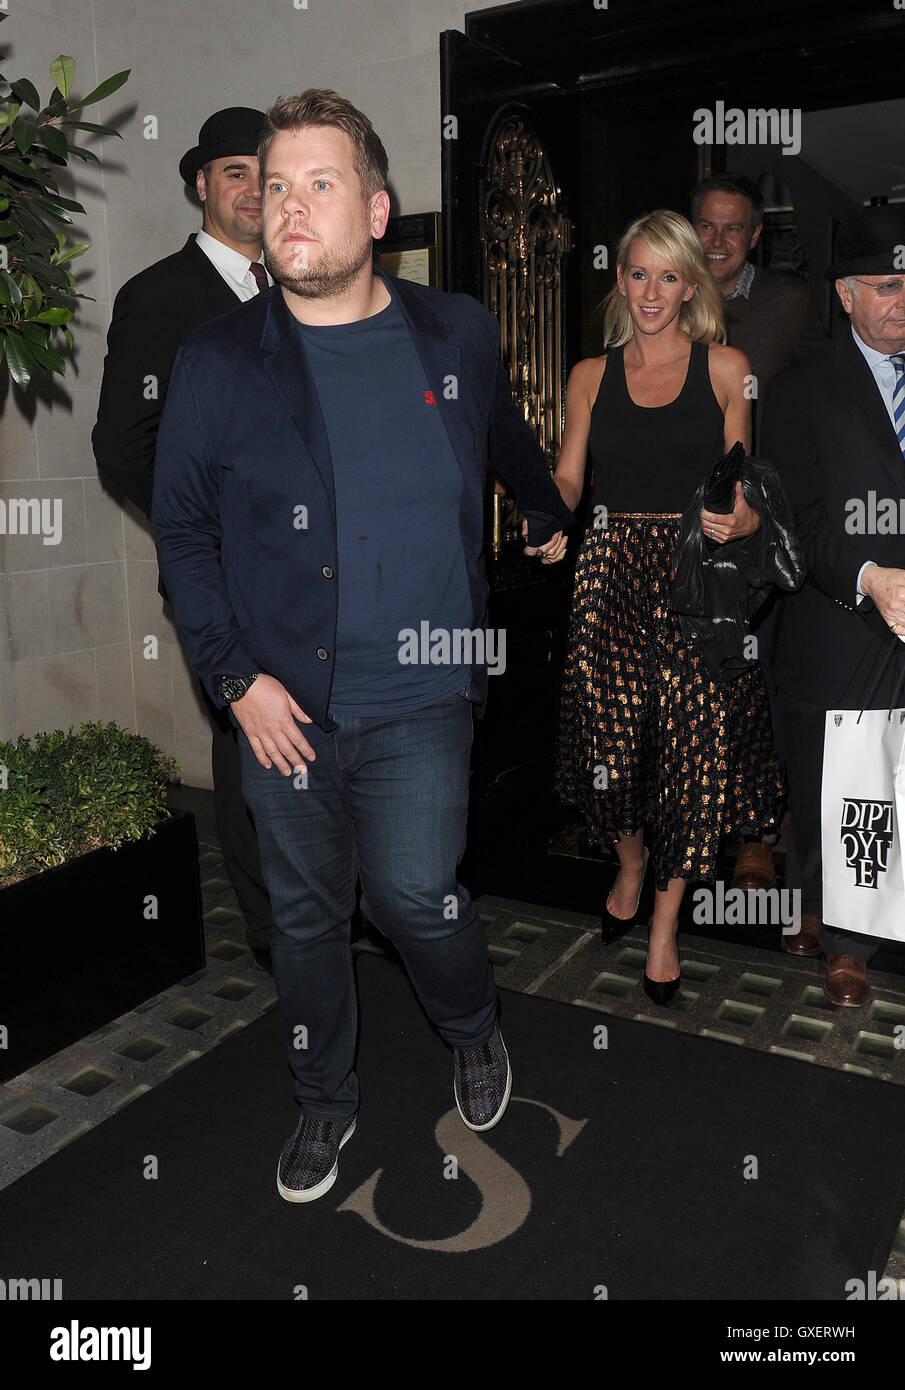 James Corden and his wife Julia Carey enjoy dinner with entrepreneur Peter Jones and his partner Tara Capp. The group were later joined by comedian David Walliams, who Corden greeted by grabbing his bum as he approached the table. After almost four hours Stock Photo